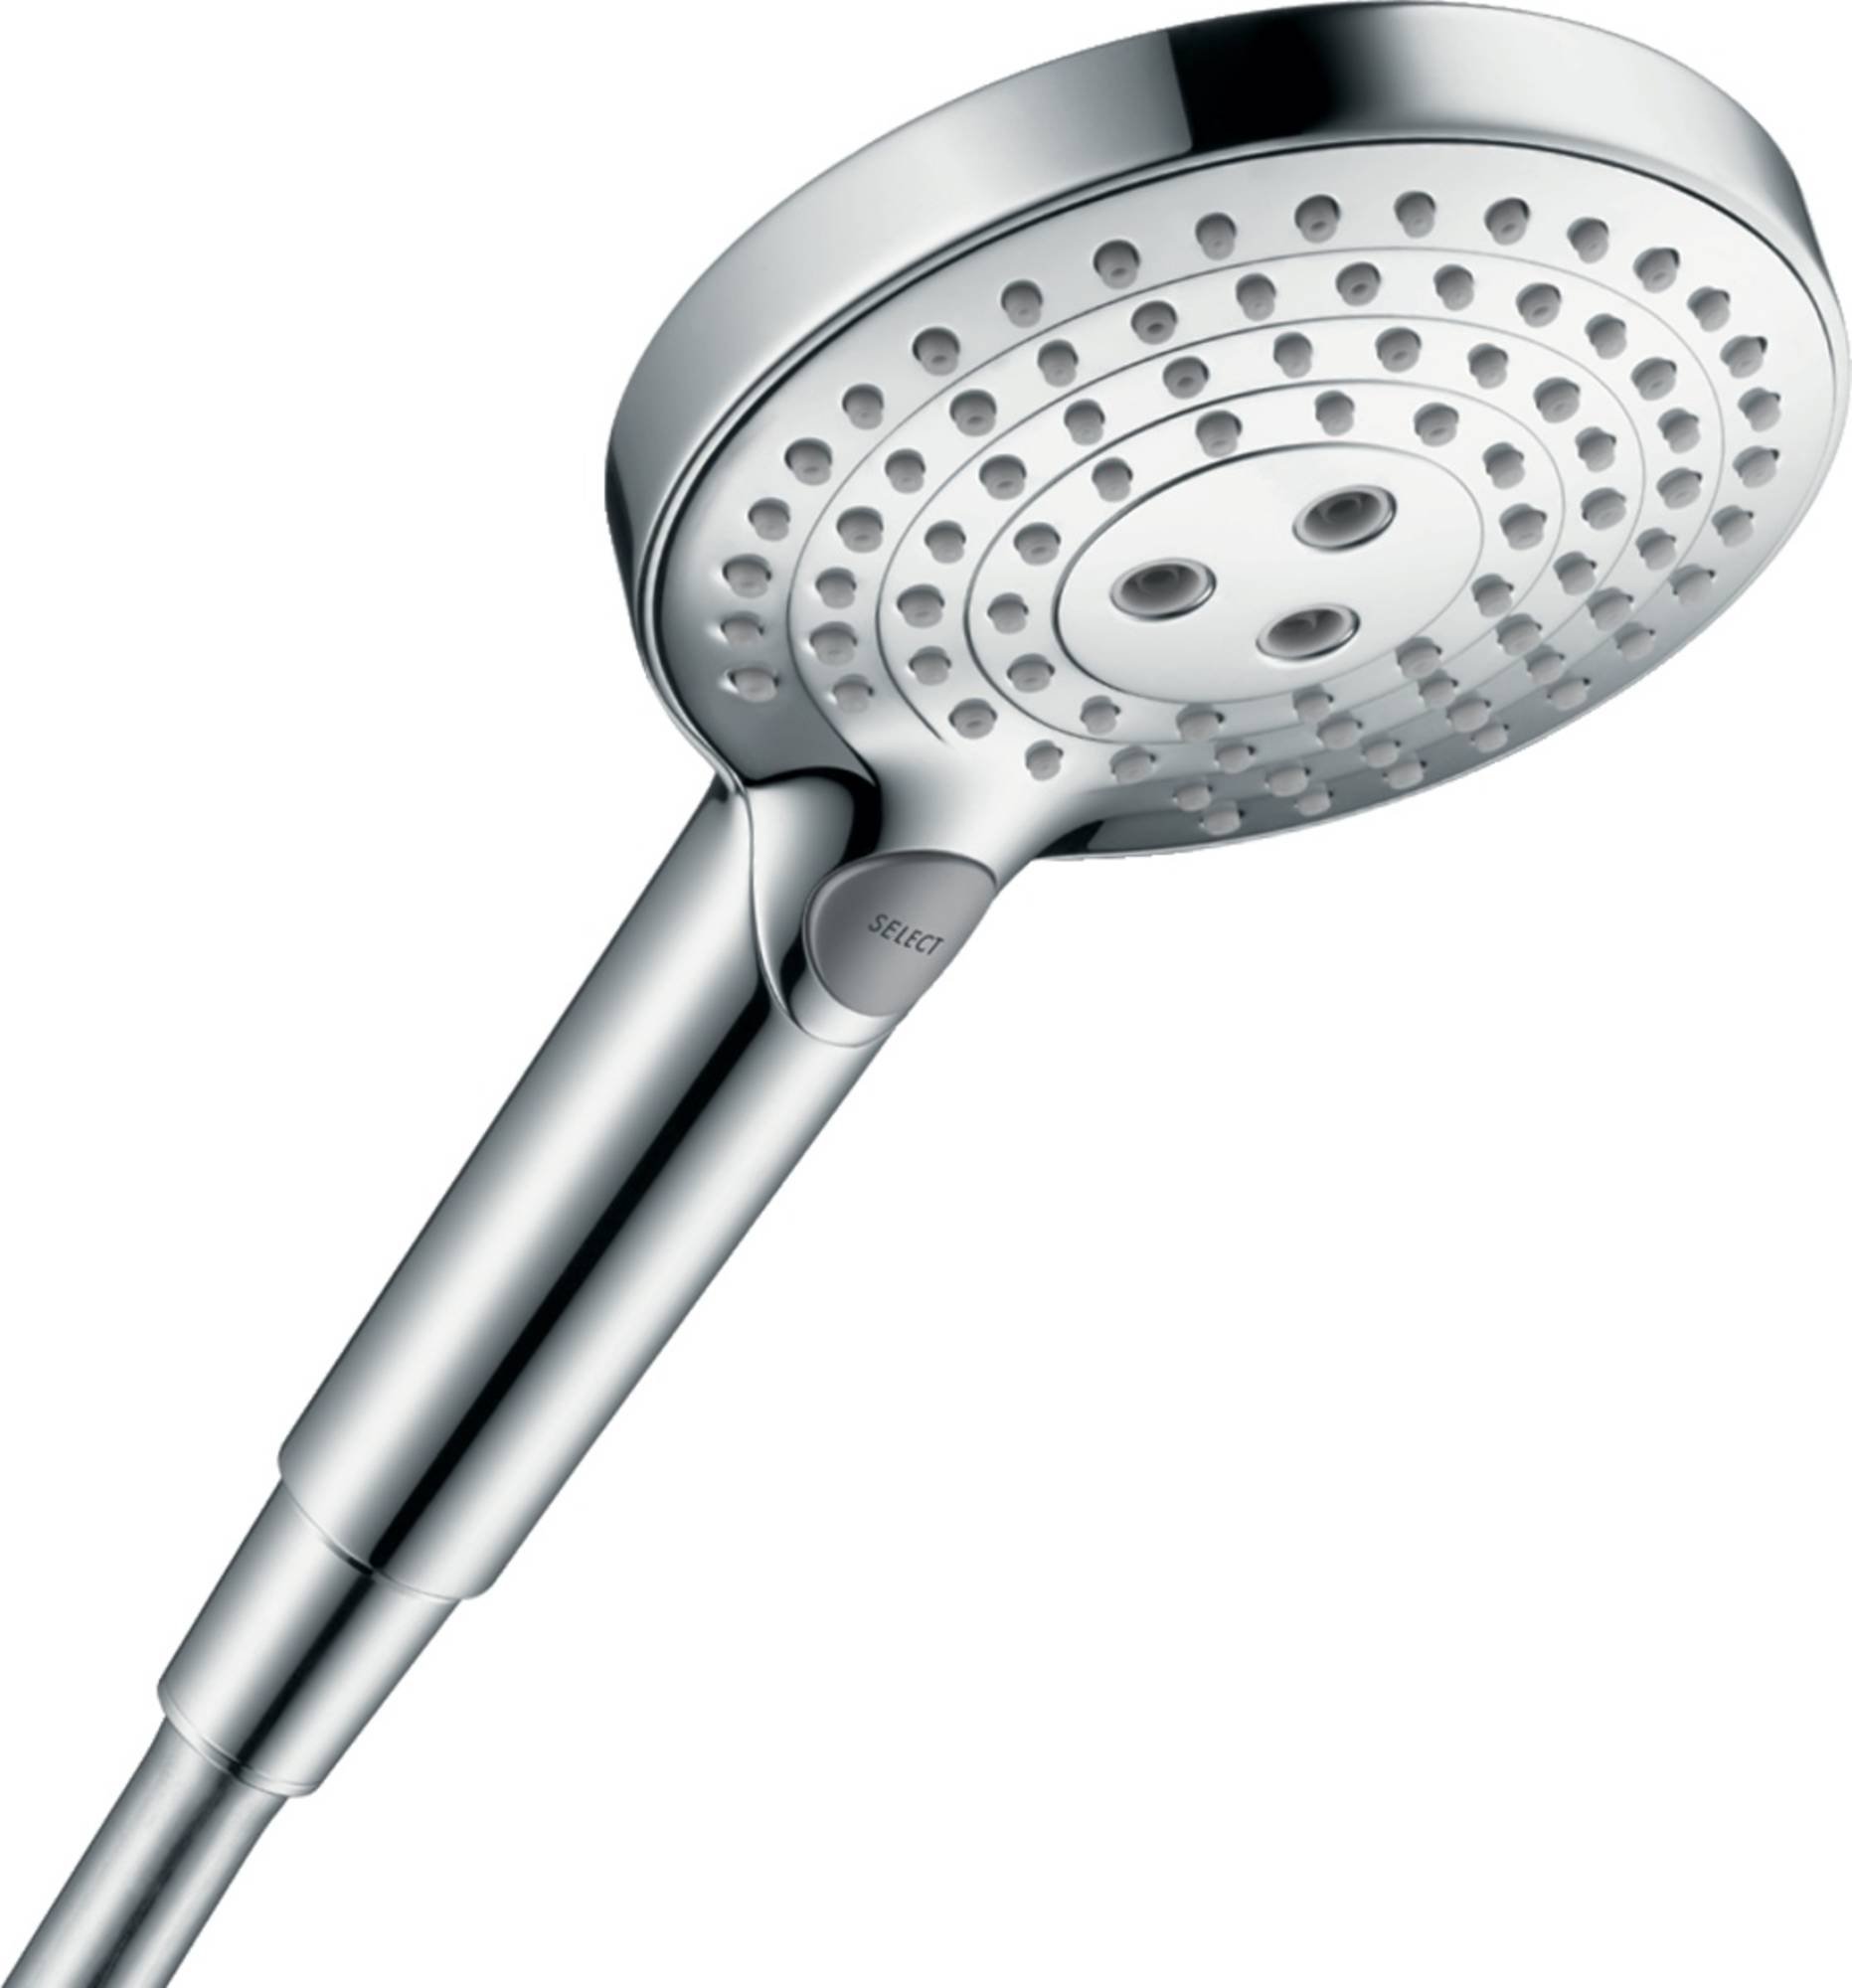 Hansgrohe Select s120 handdouche 3jet Chroom - Saniweb.be